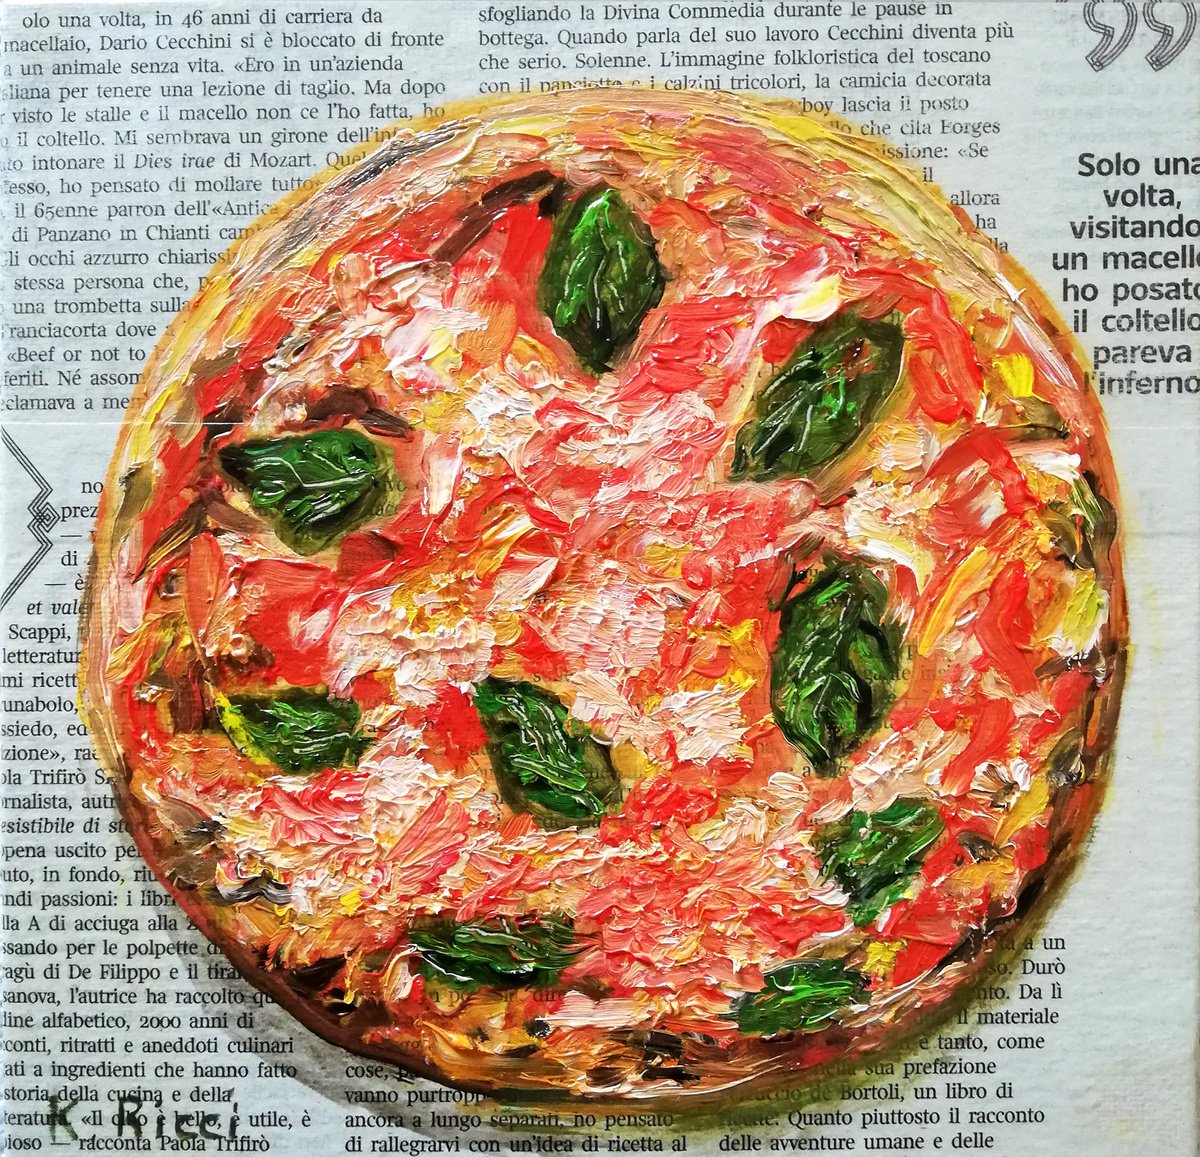 Pizza on Newspaper Original Oil on Canvas Board Painting 8 by 8 inches (20x20 cm) by Katia Ricci